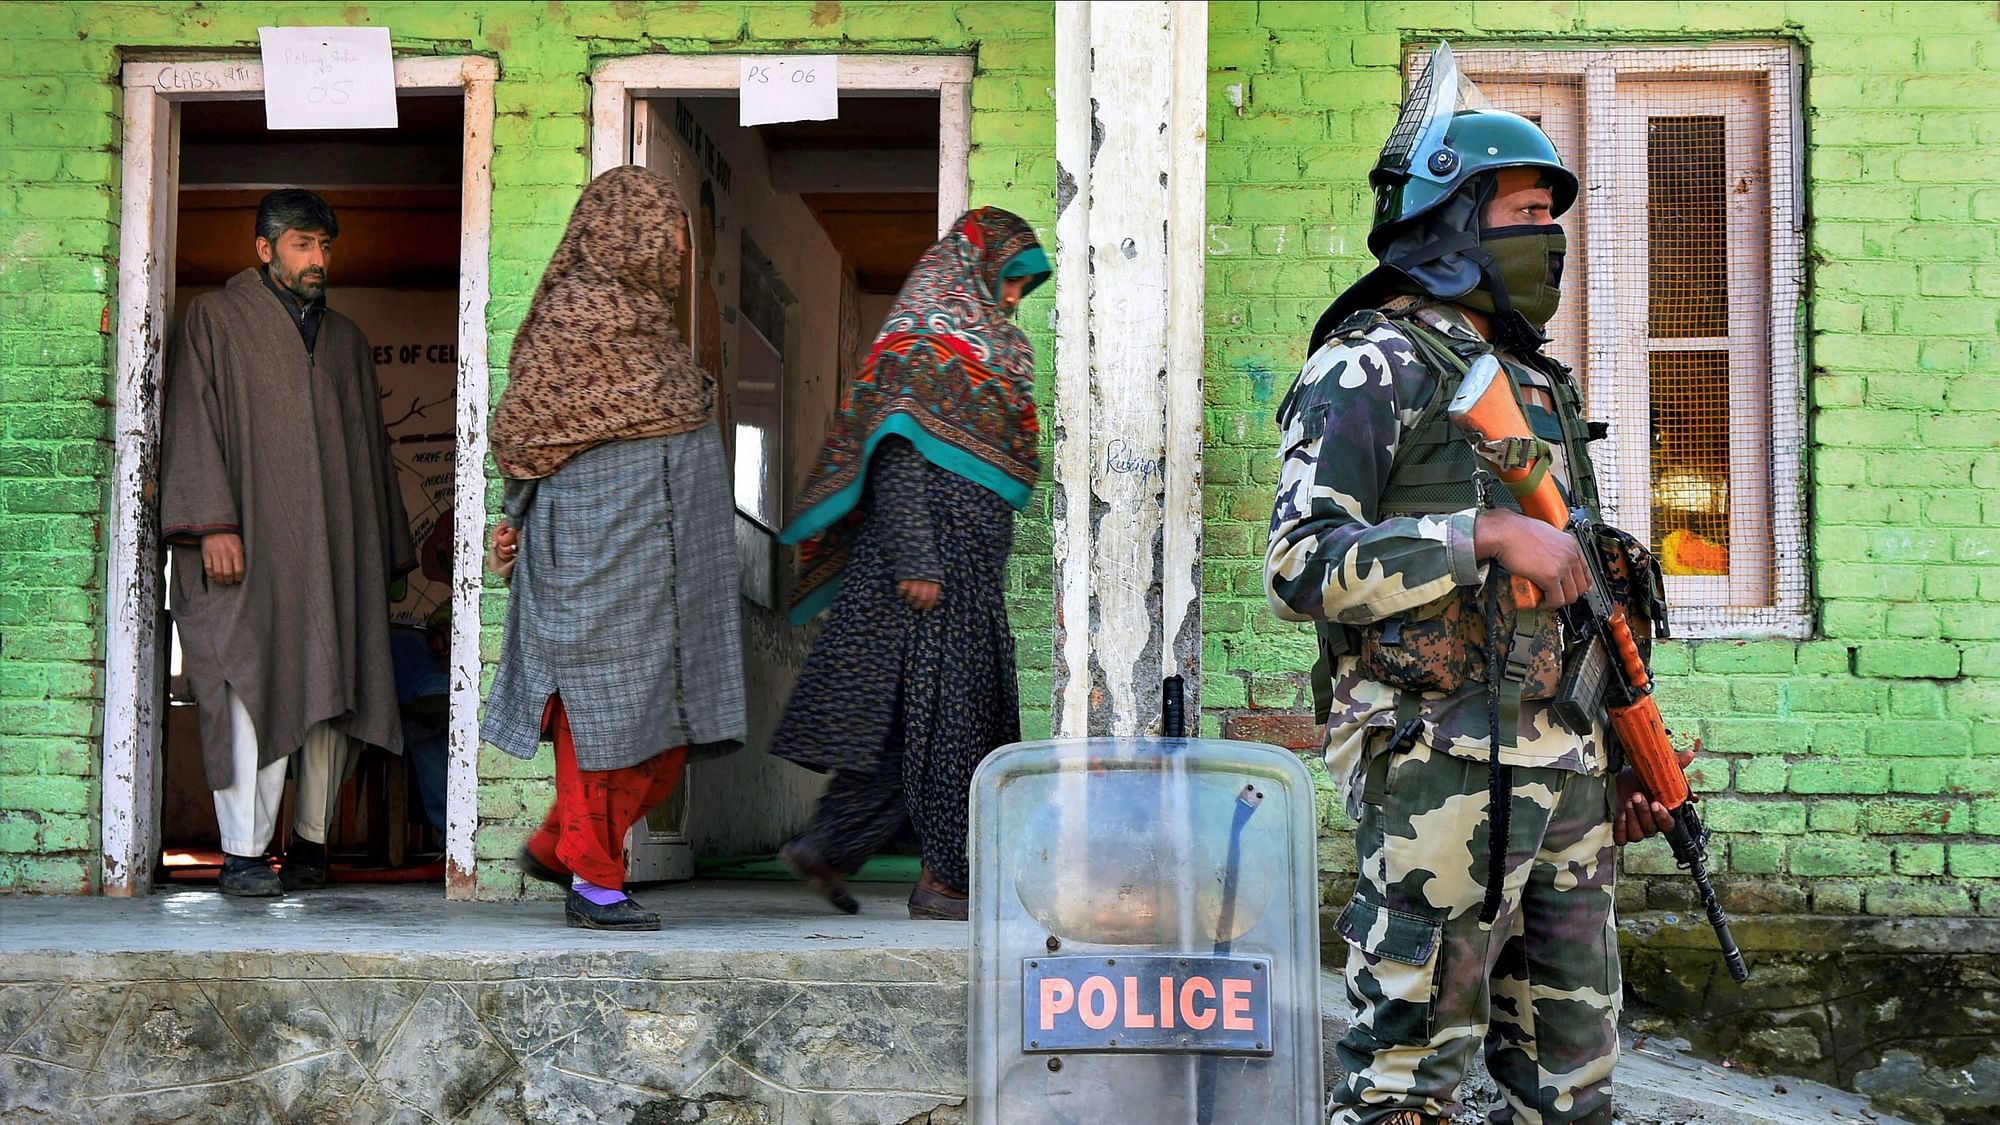 File Image of an election in Jammu &amp; Kashmir. Used for representational purposes.